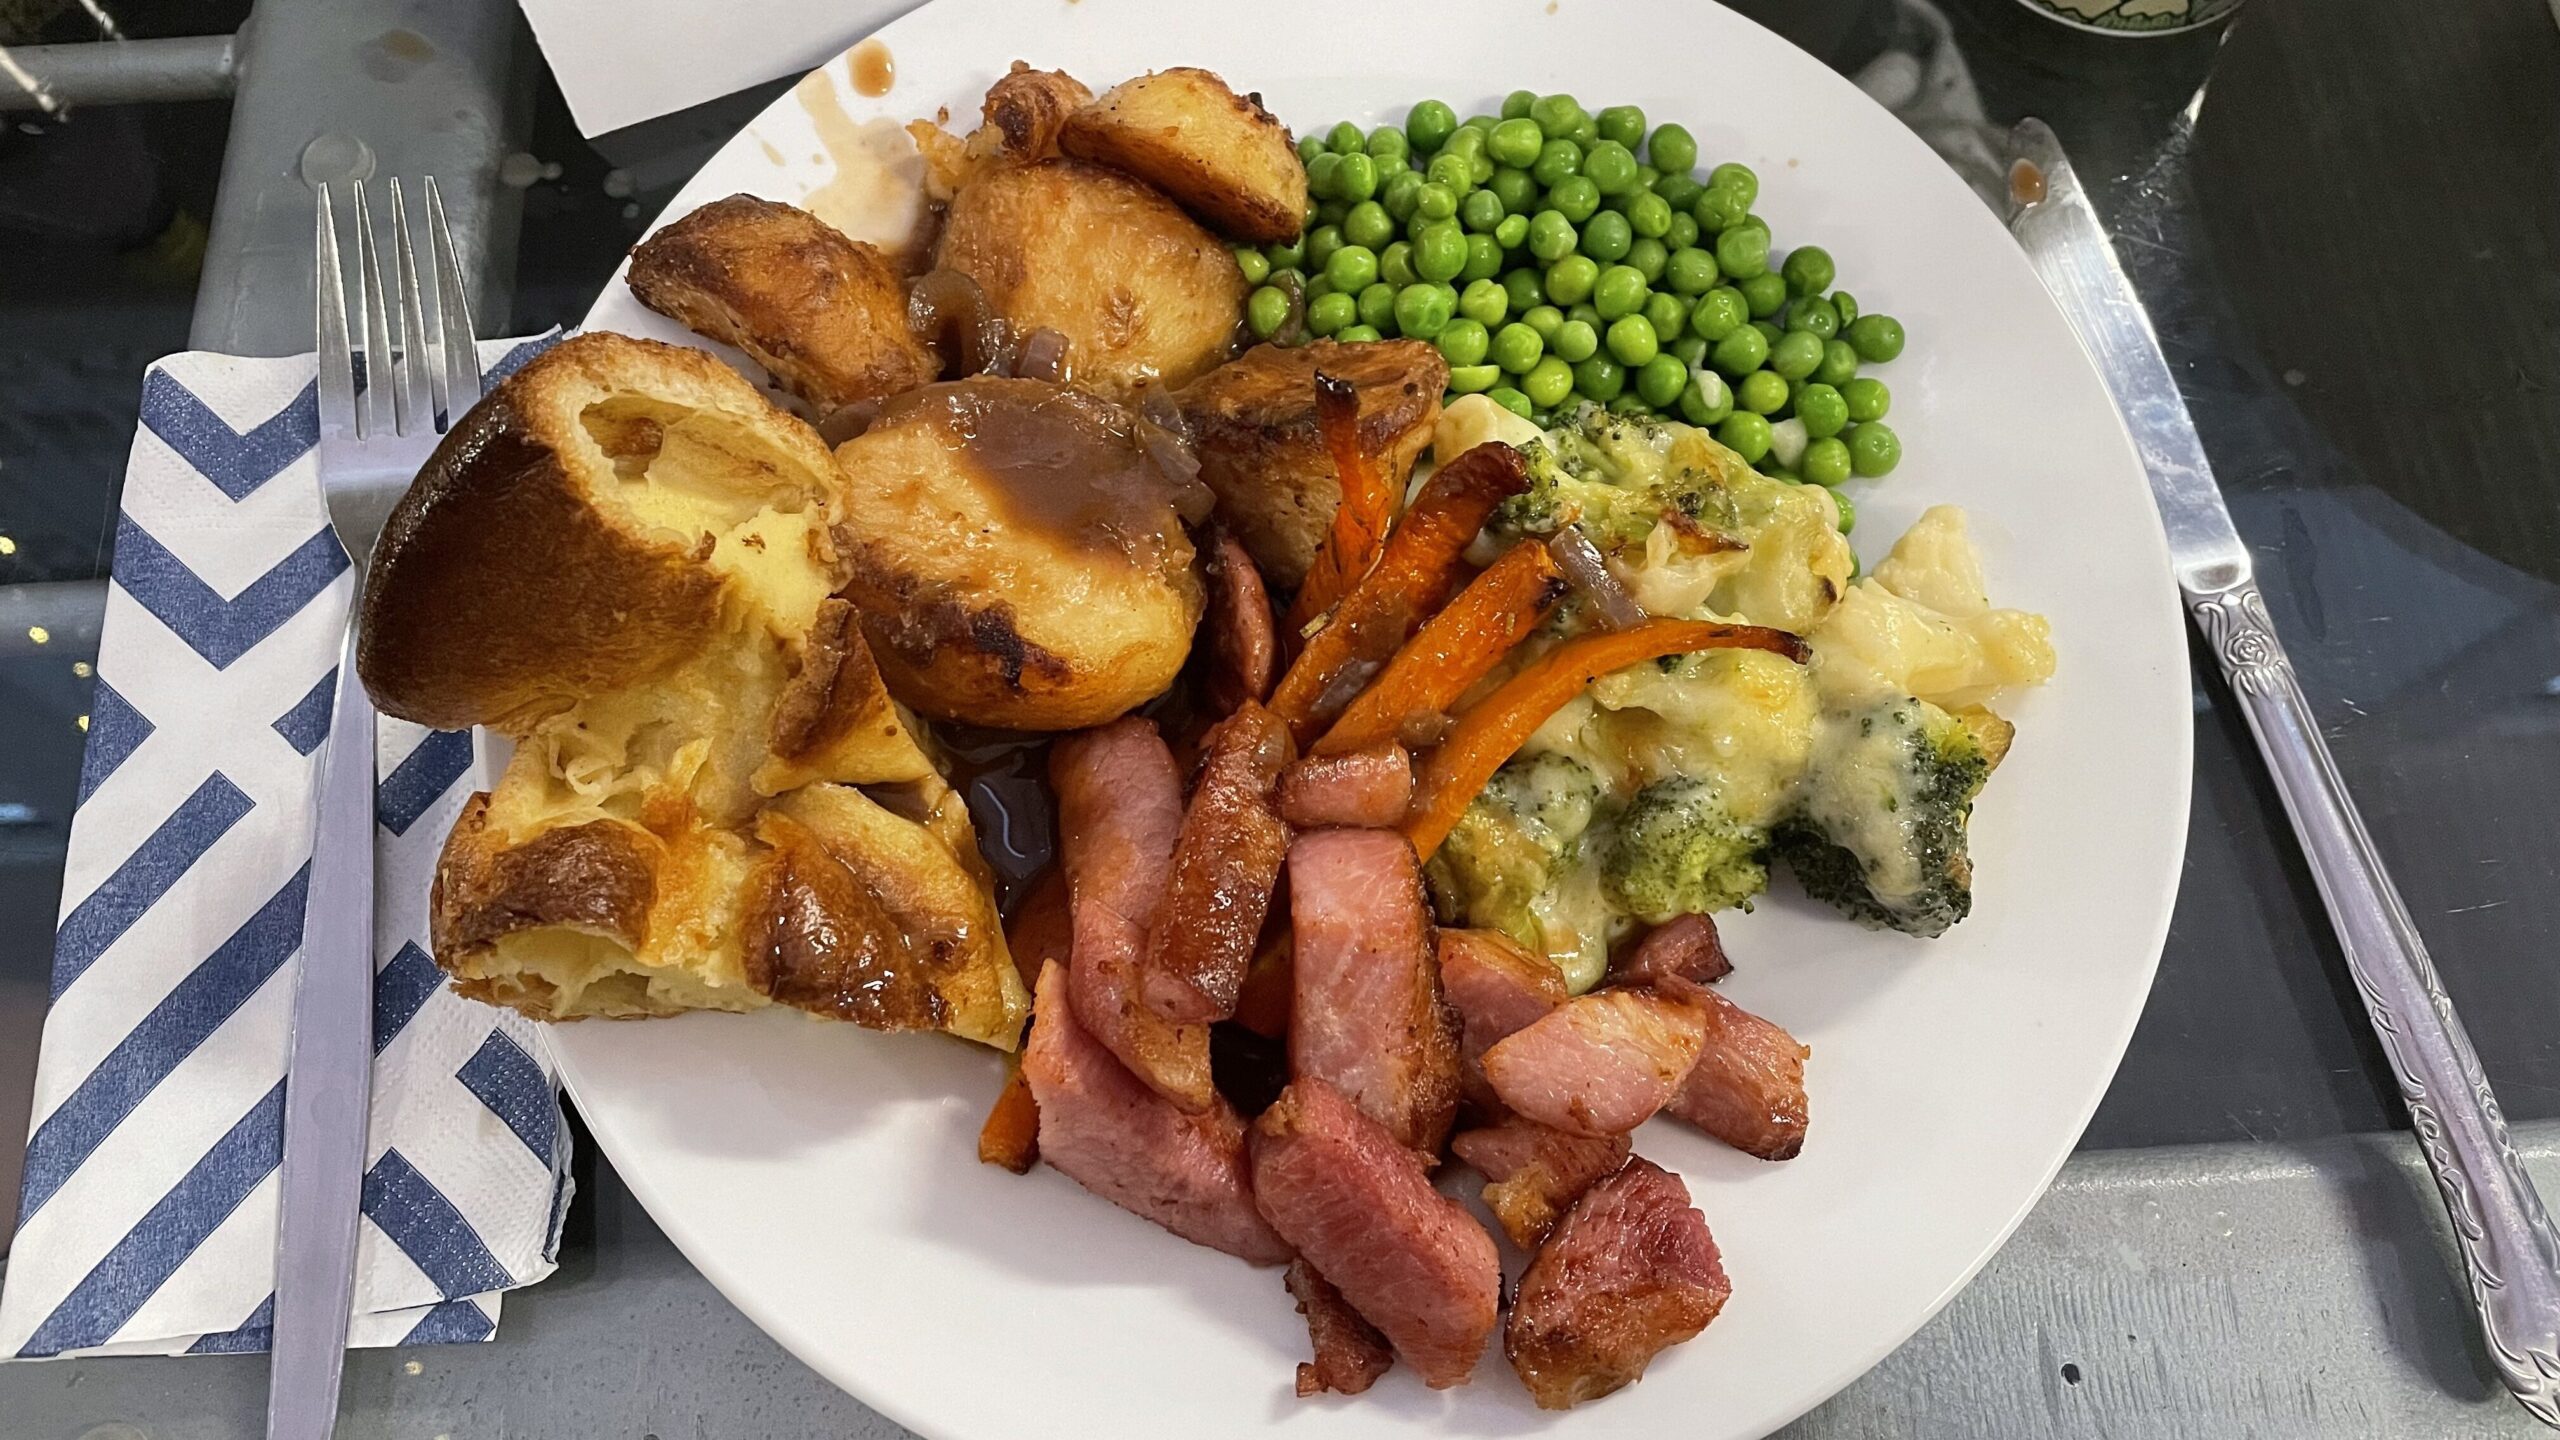 A plate of English roast with yorkshire pudding, peas, carrots, roasted potatoes, ham, and broccoli 